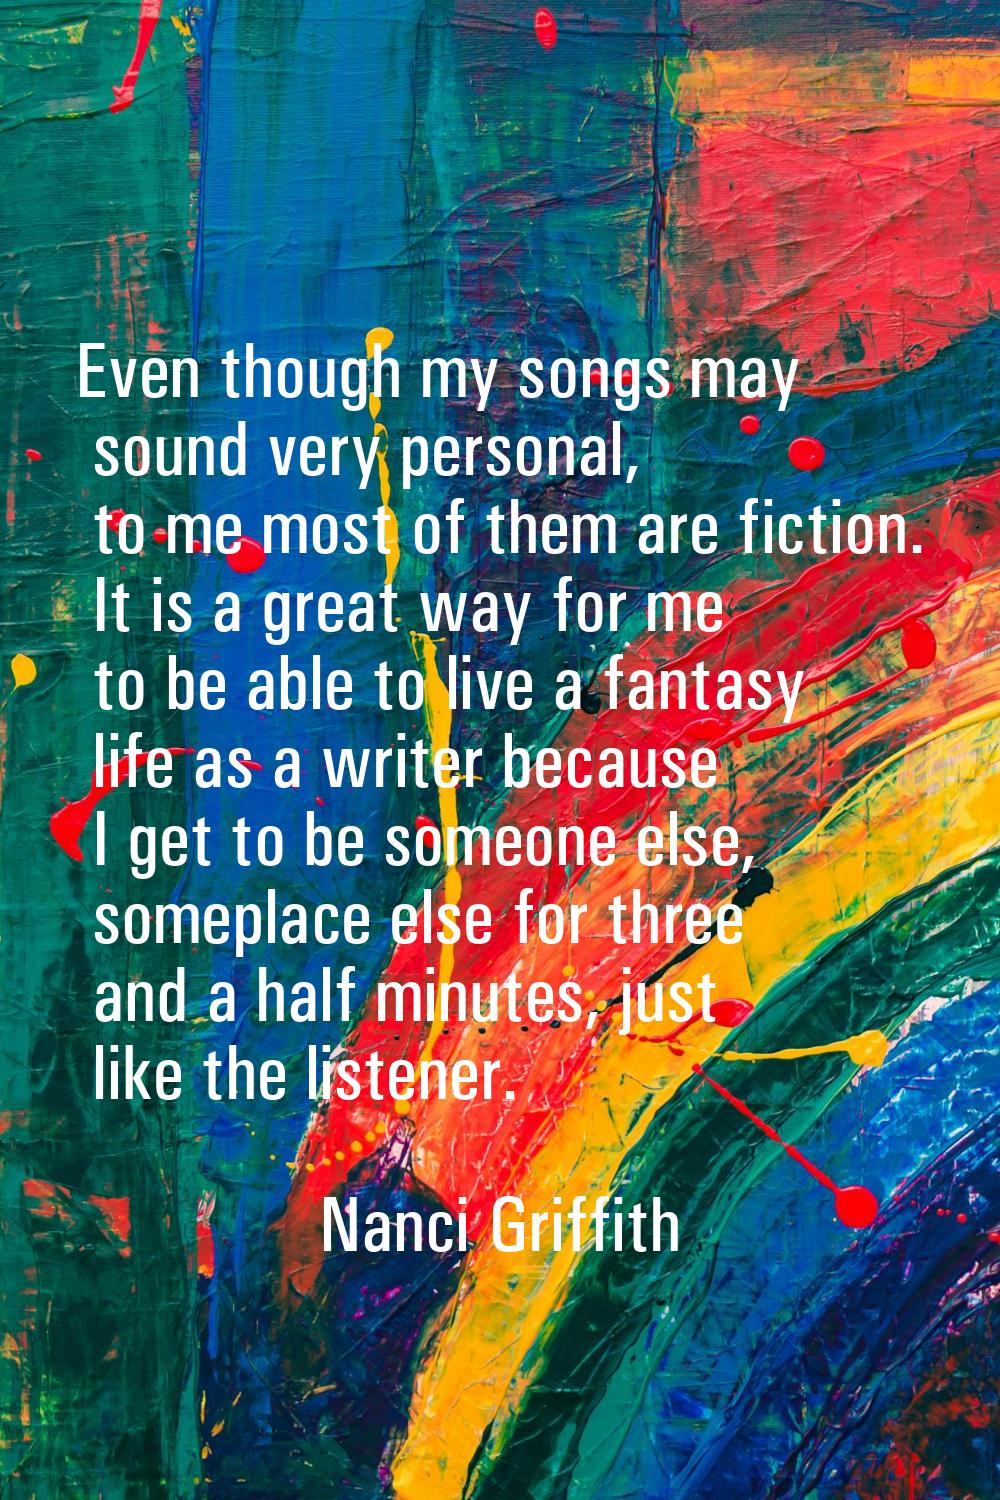 Even though my songs may sound very personal, to me most of them are fiction. It is a great way for